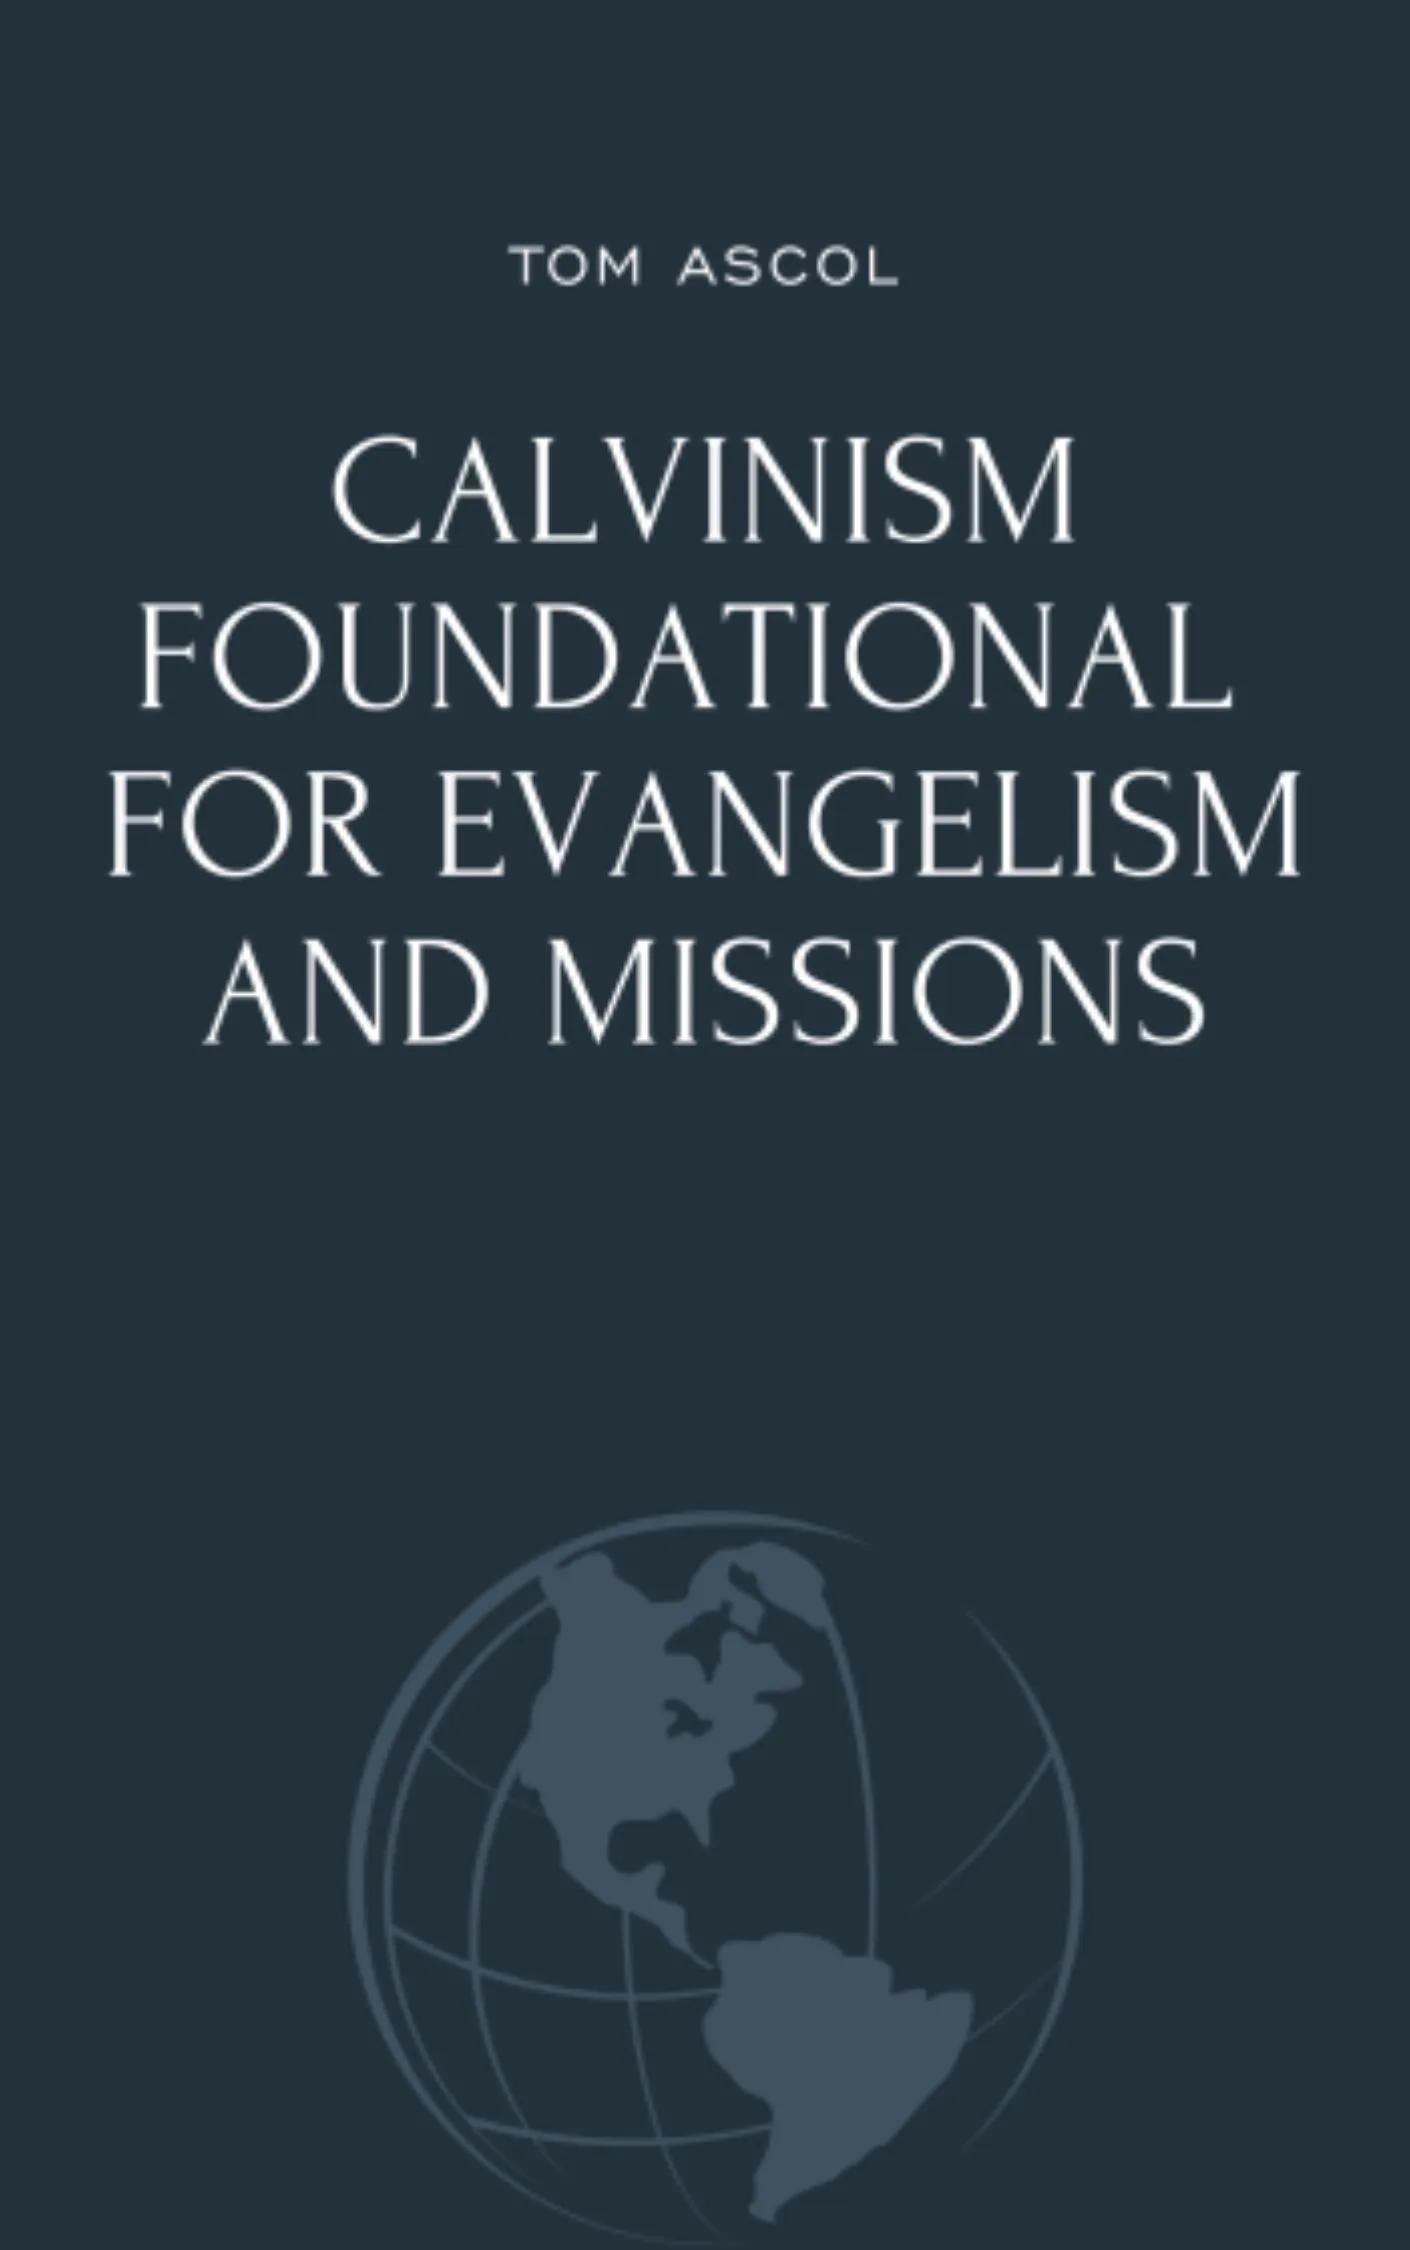 Calvinism Foundational for Evangelism and Missions by Tom Ascol